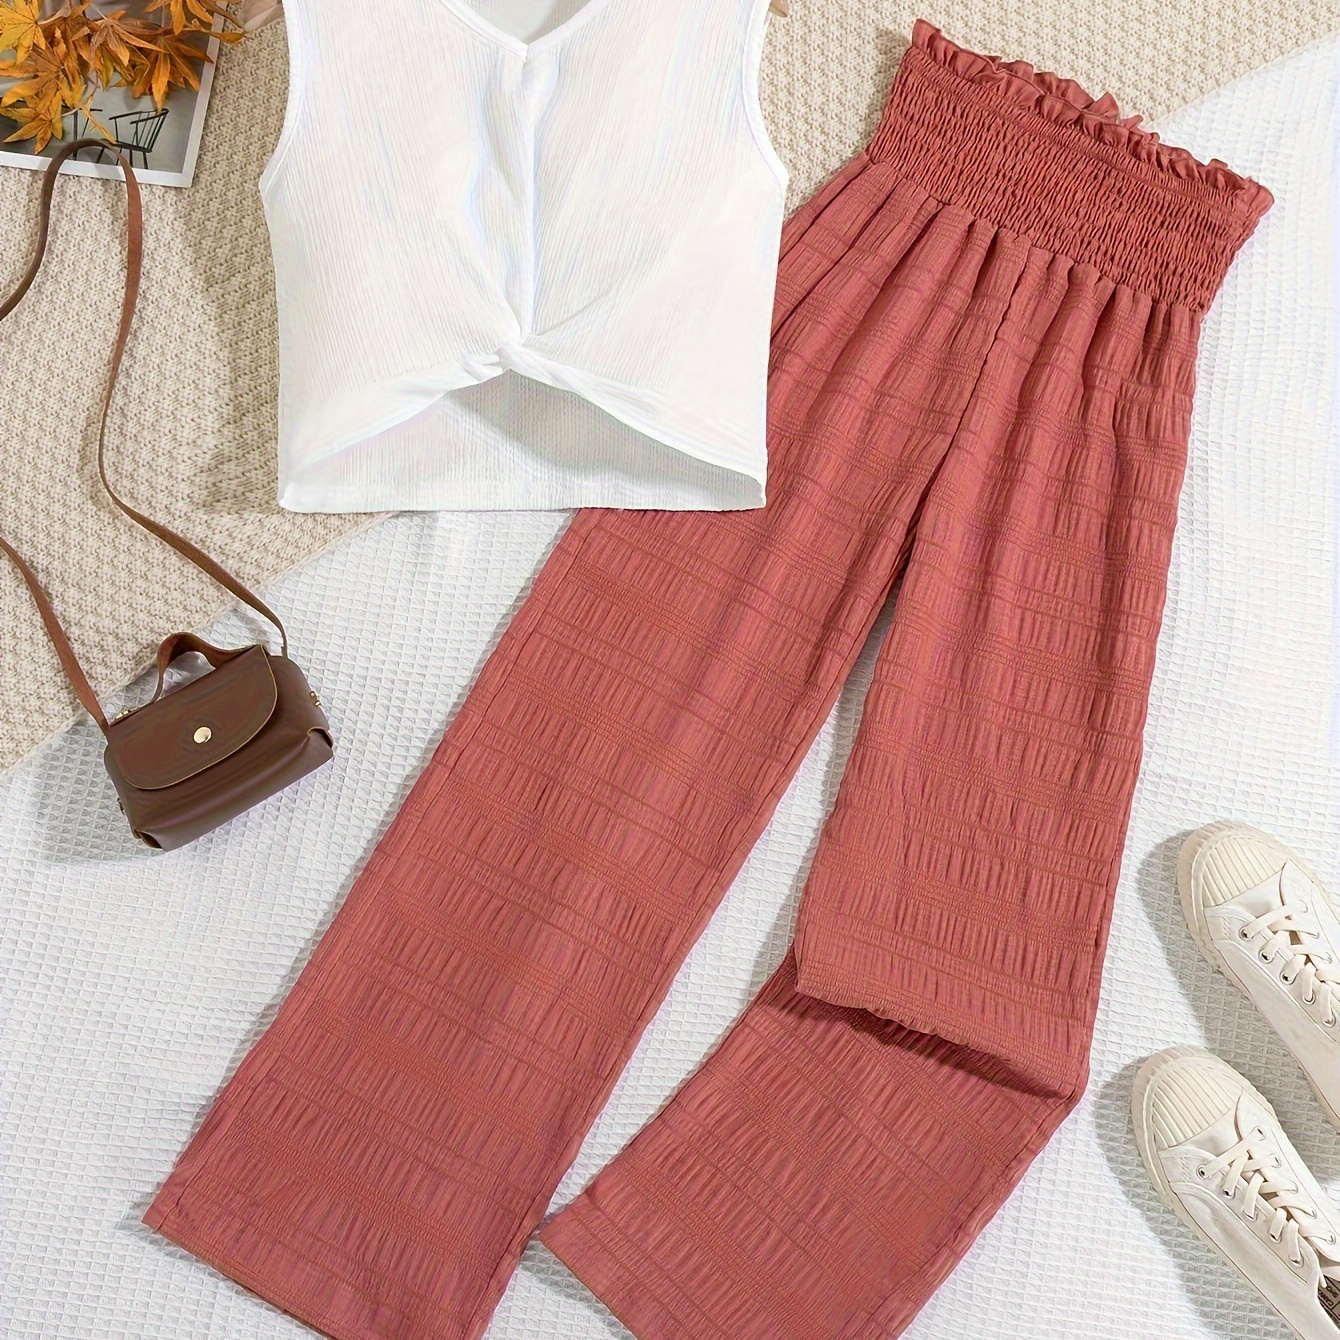 

Girls Casual & Stylish Outfit, 2pcs/set Solid Colored Sleeveless Tank Top & Shirred High Waisted Wide-leg Pants For Summer